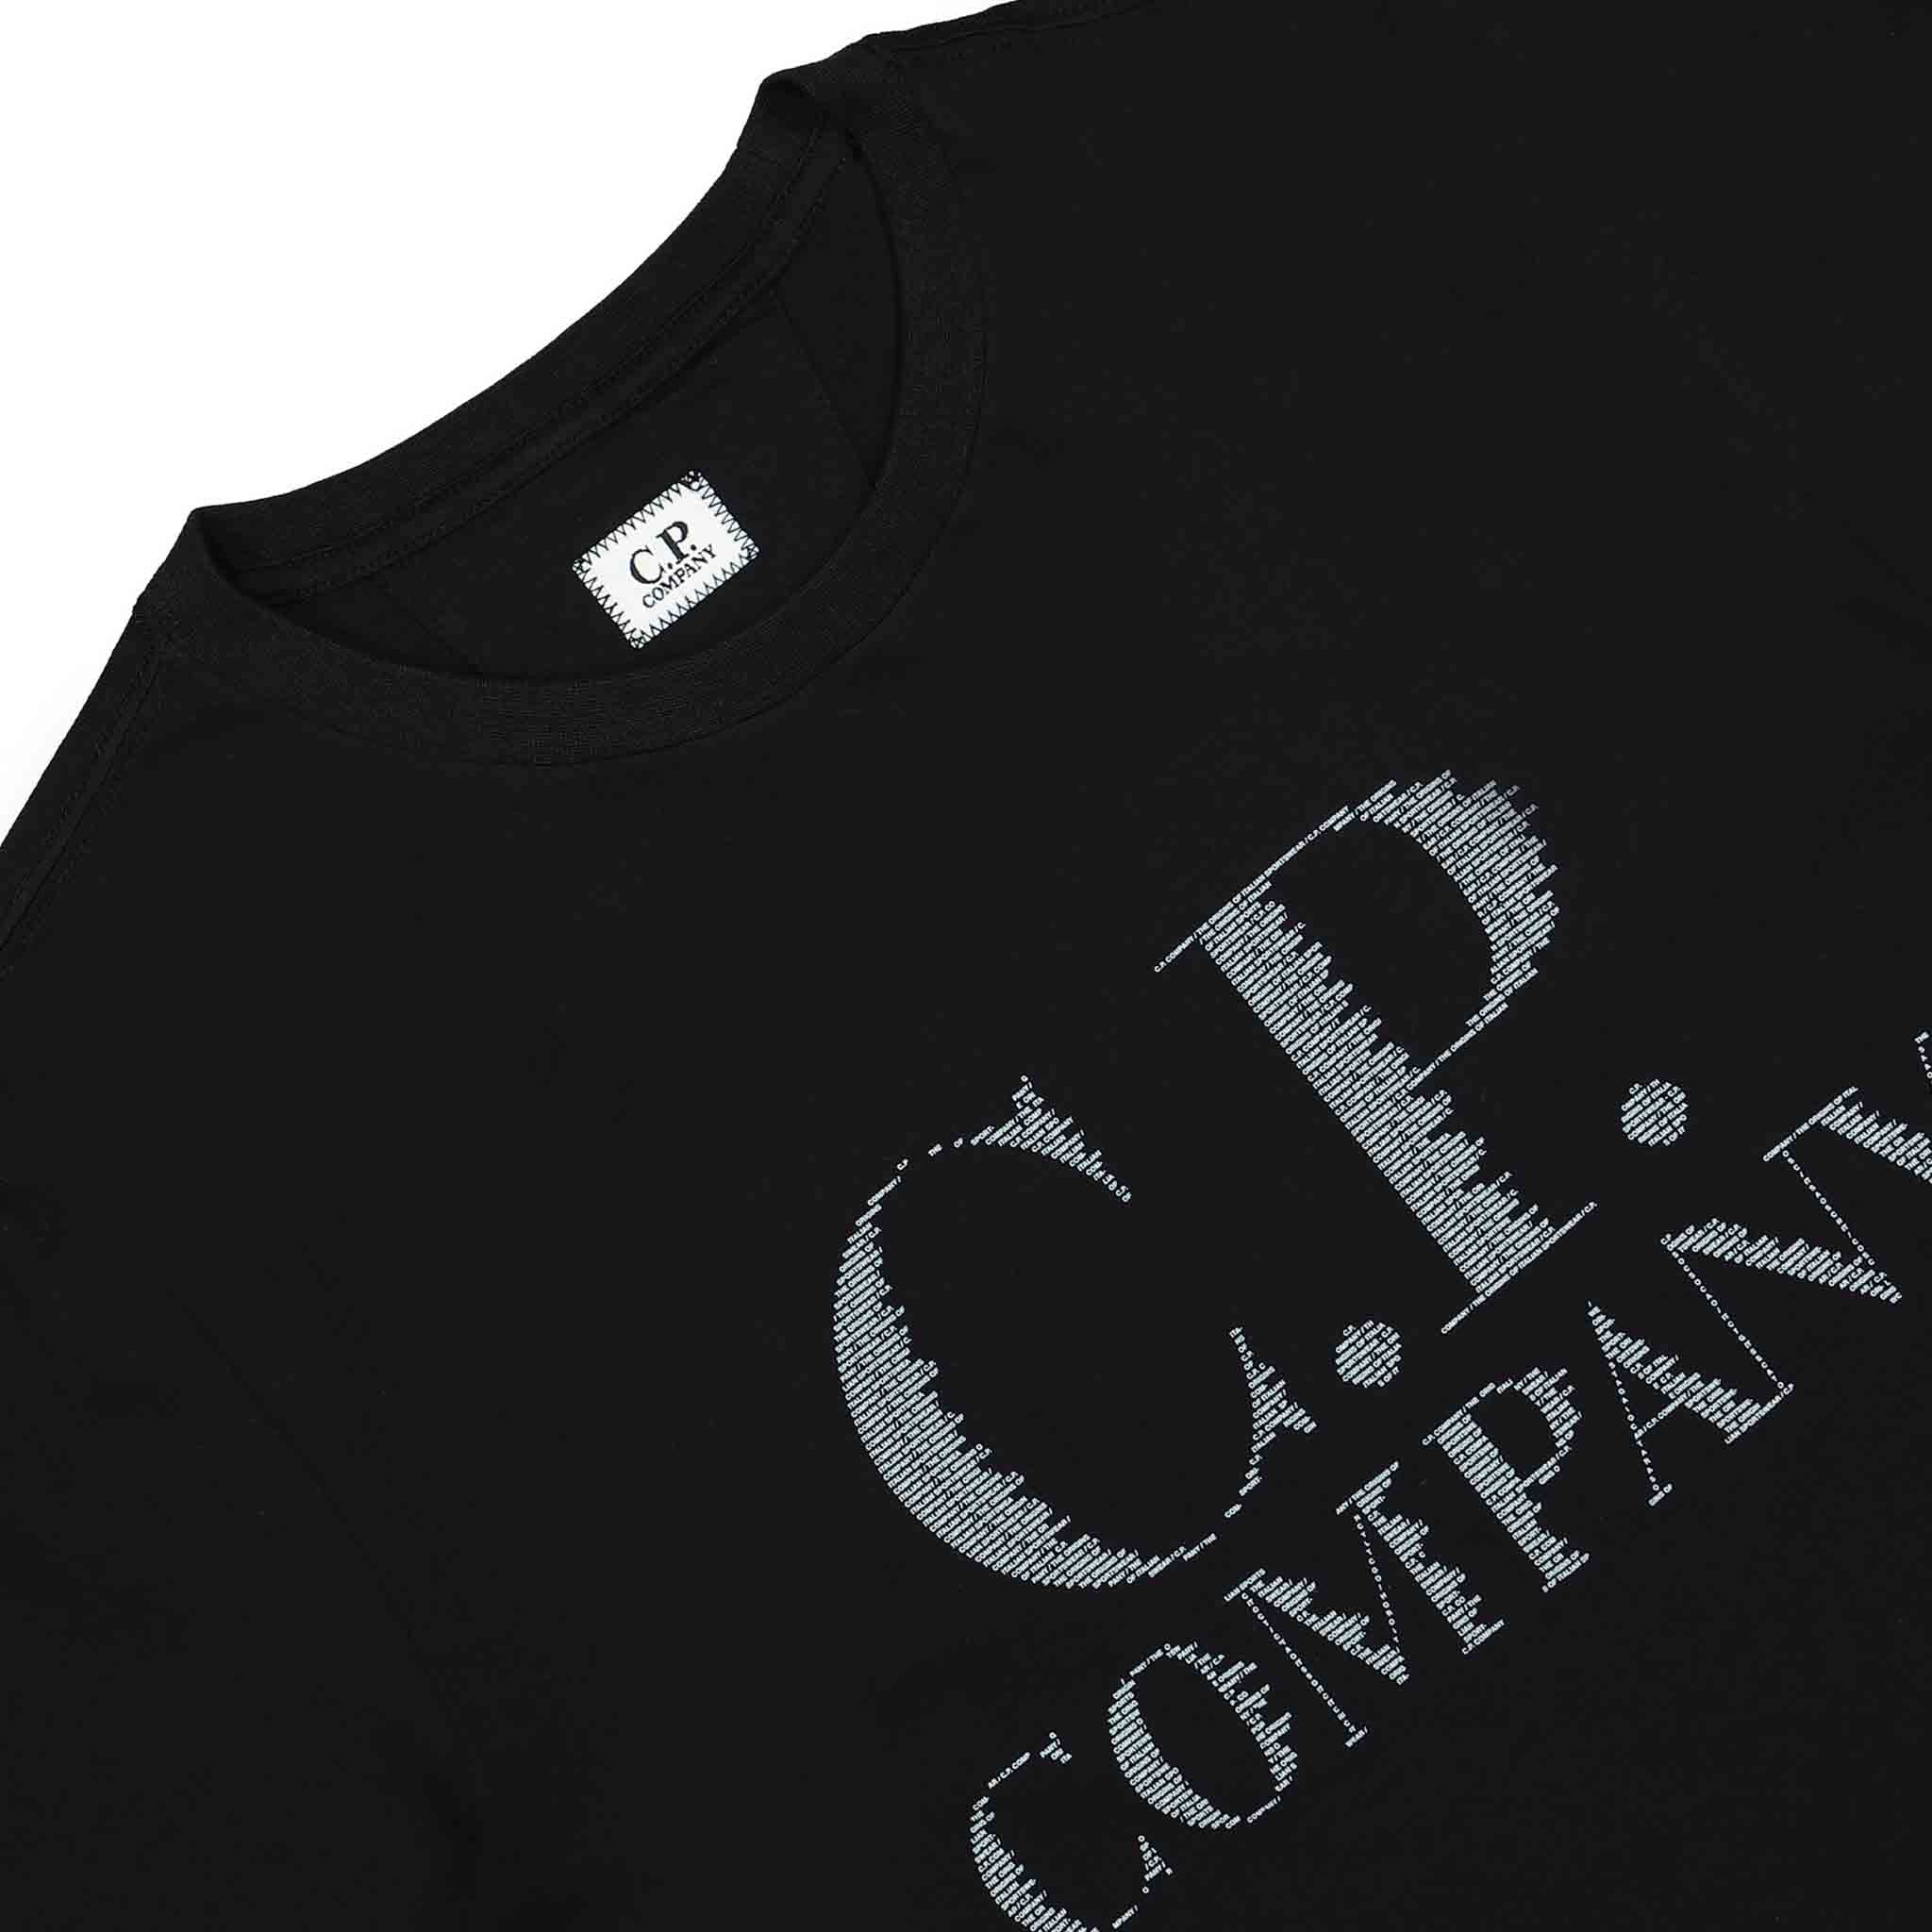 C.P. Company 30/1 Jersey Large Logo T-shirt in Black